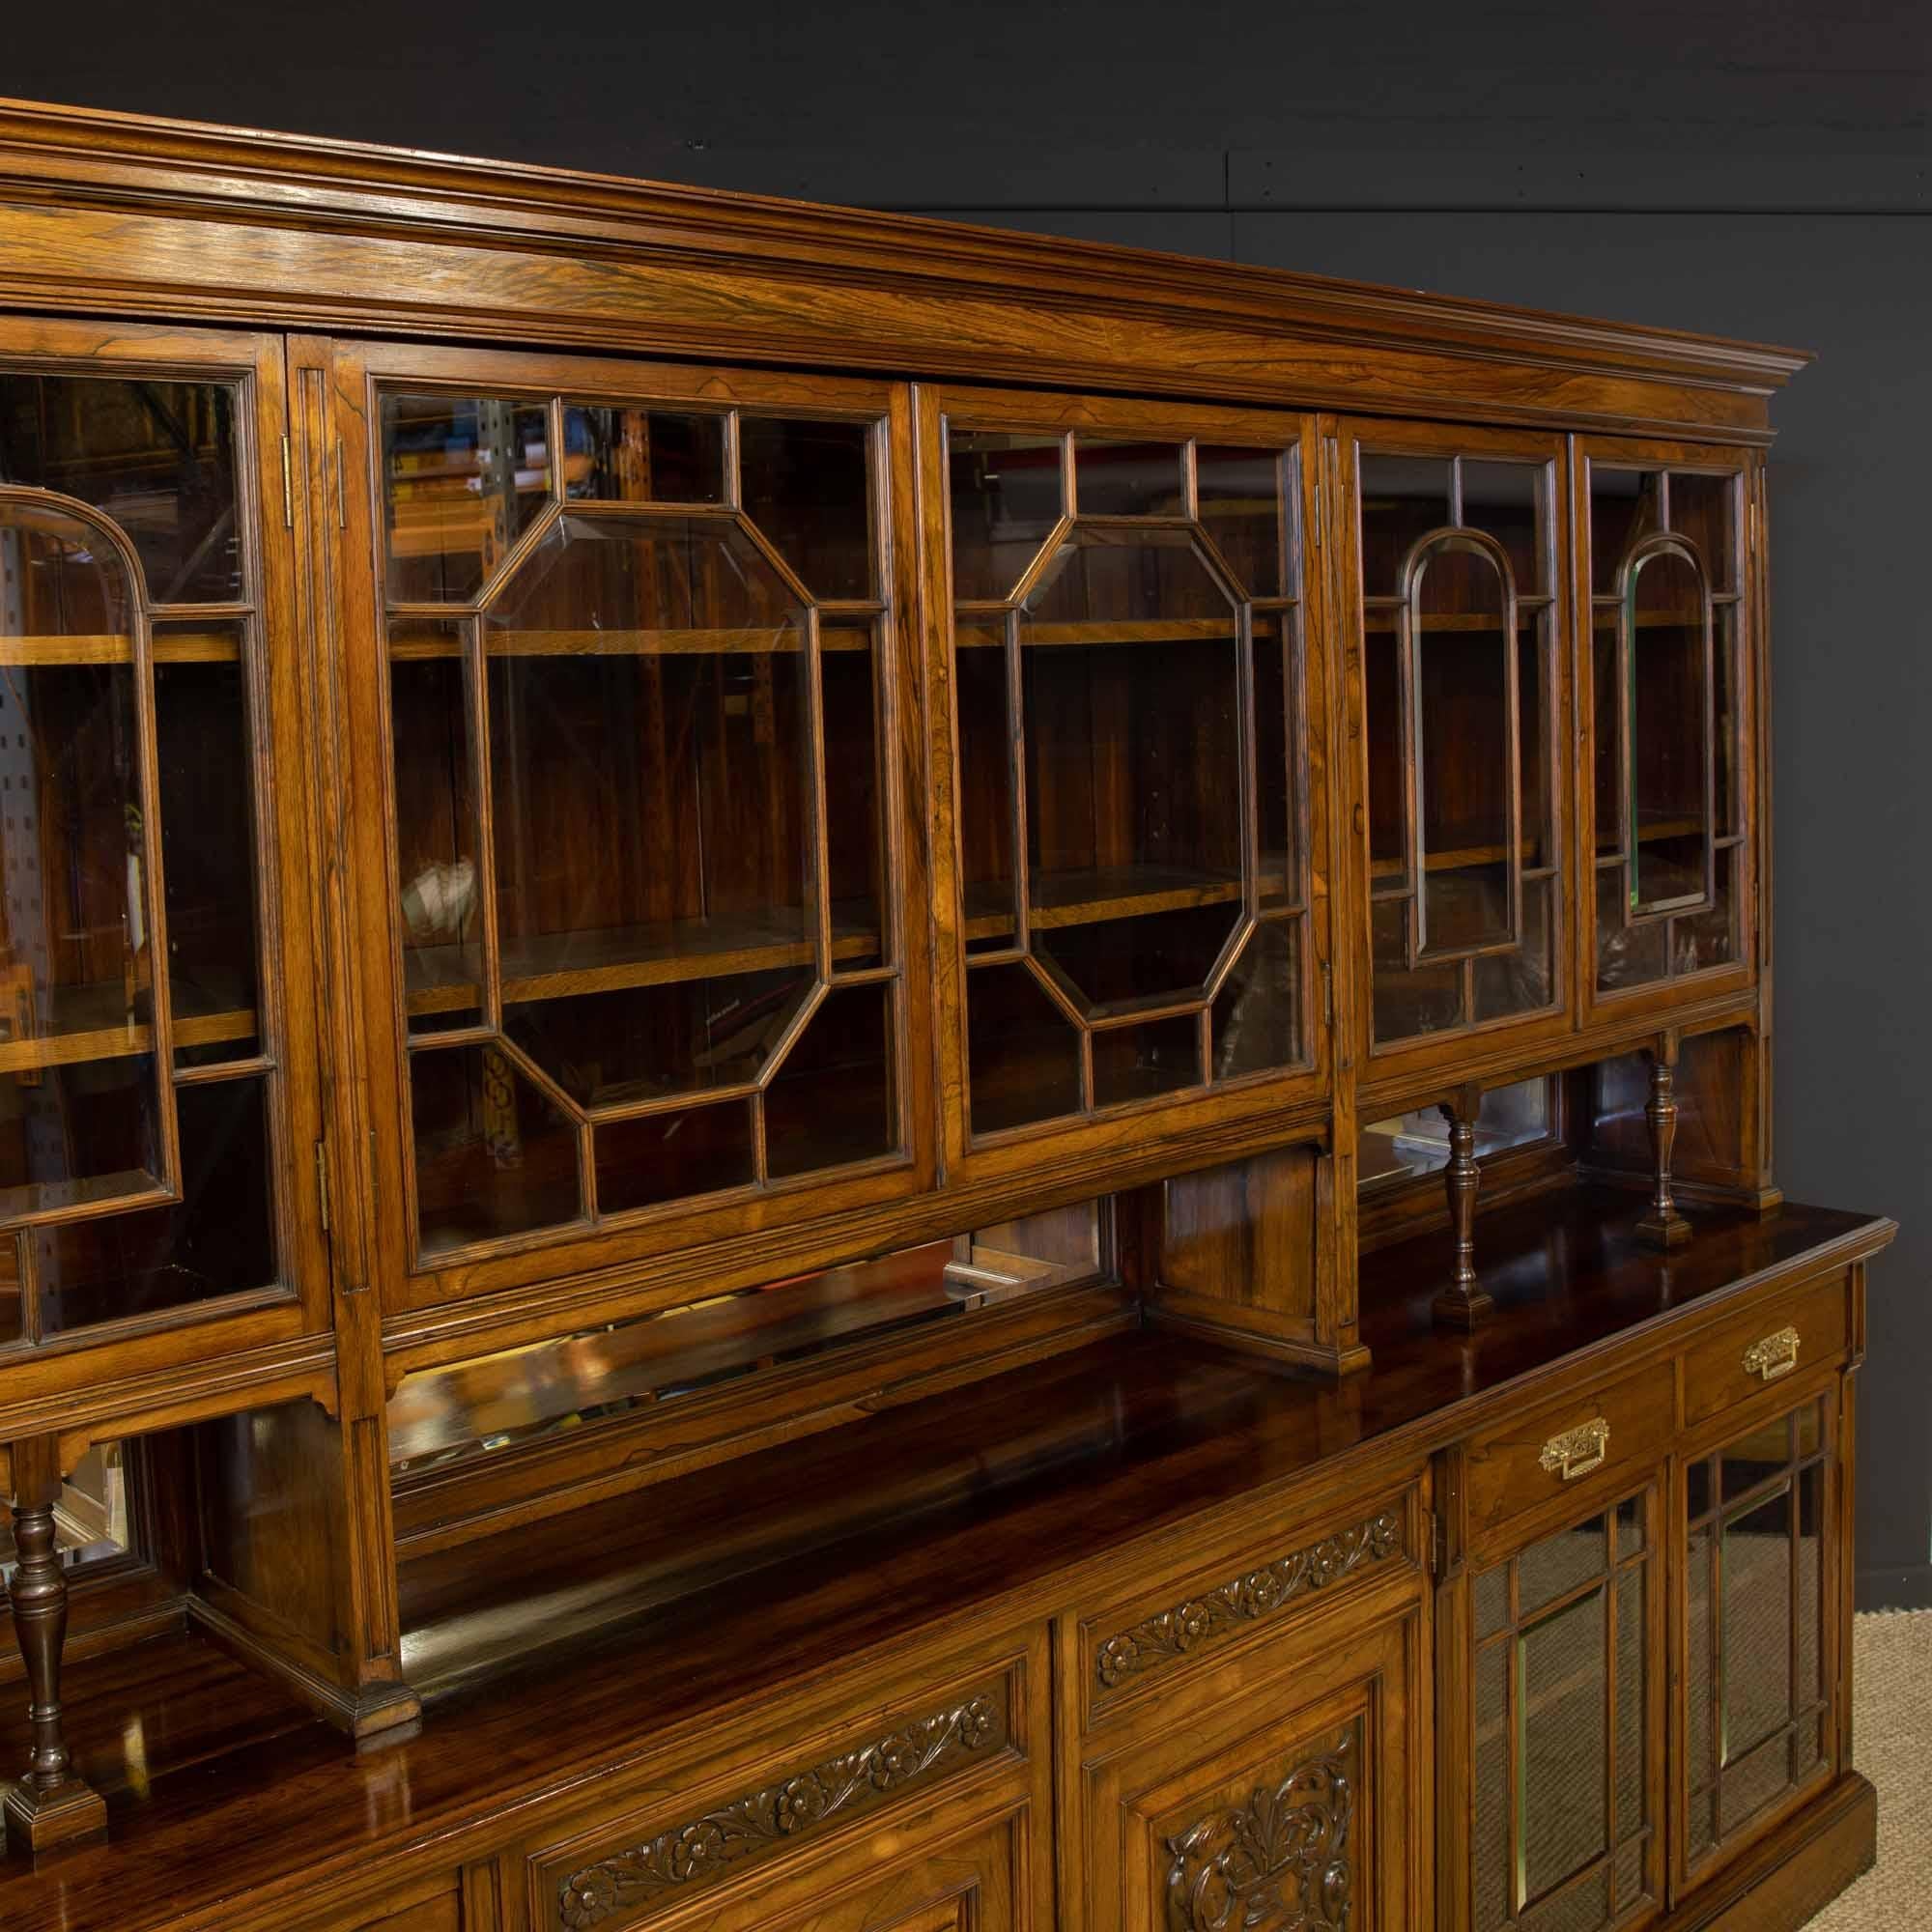 Early 20th Century Edwardian Rosewood Bookcase from Harrods Manchester